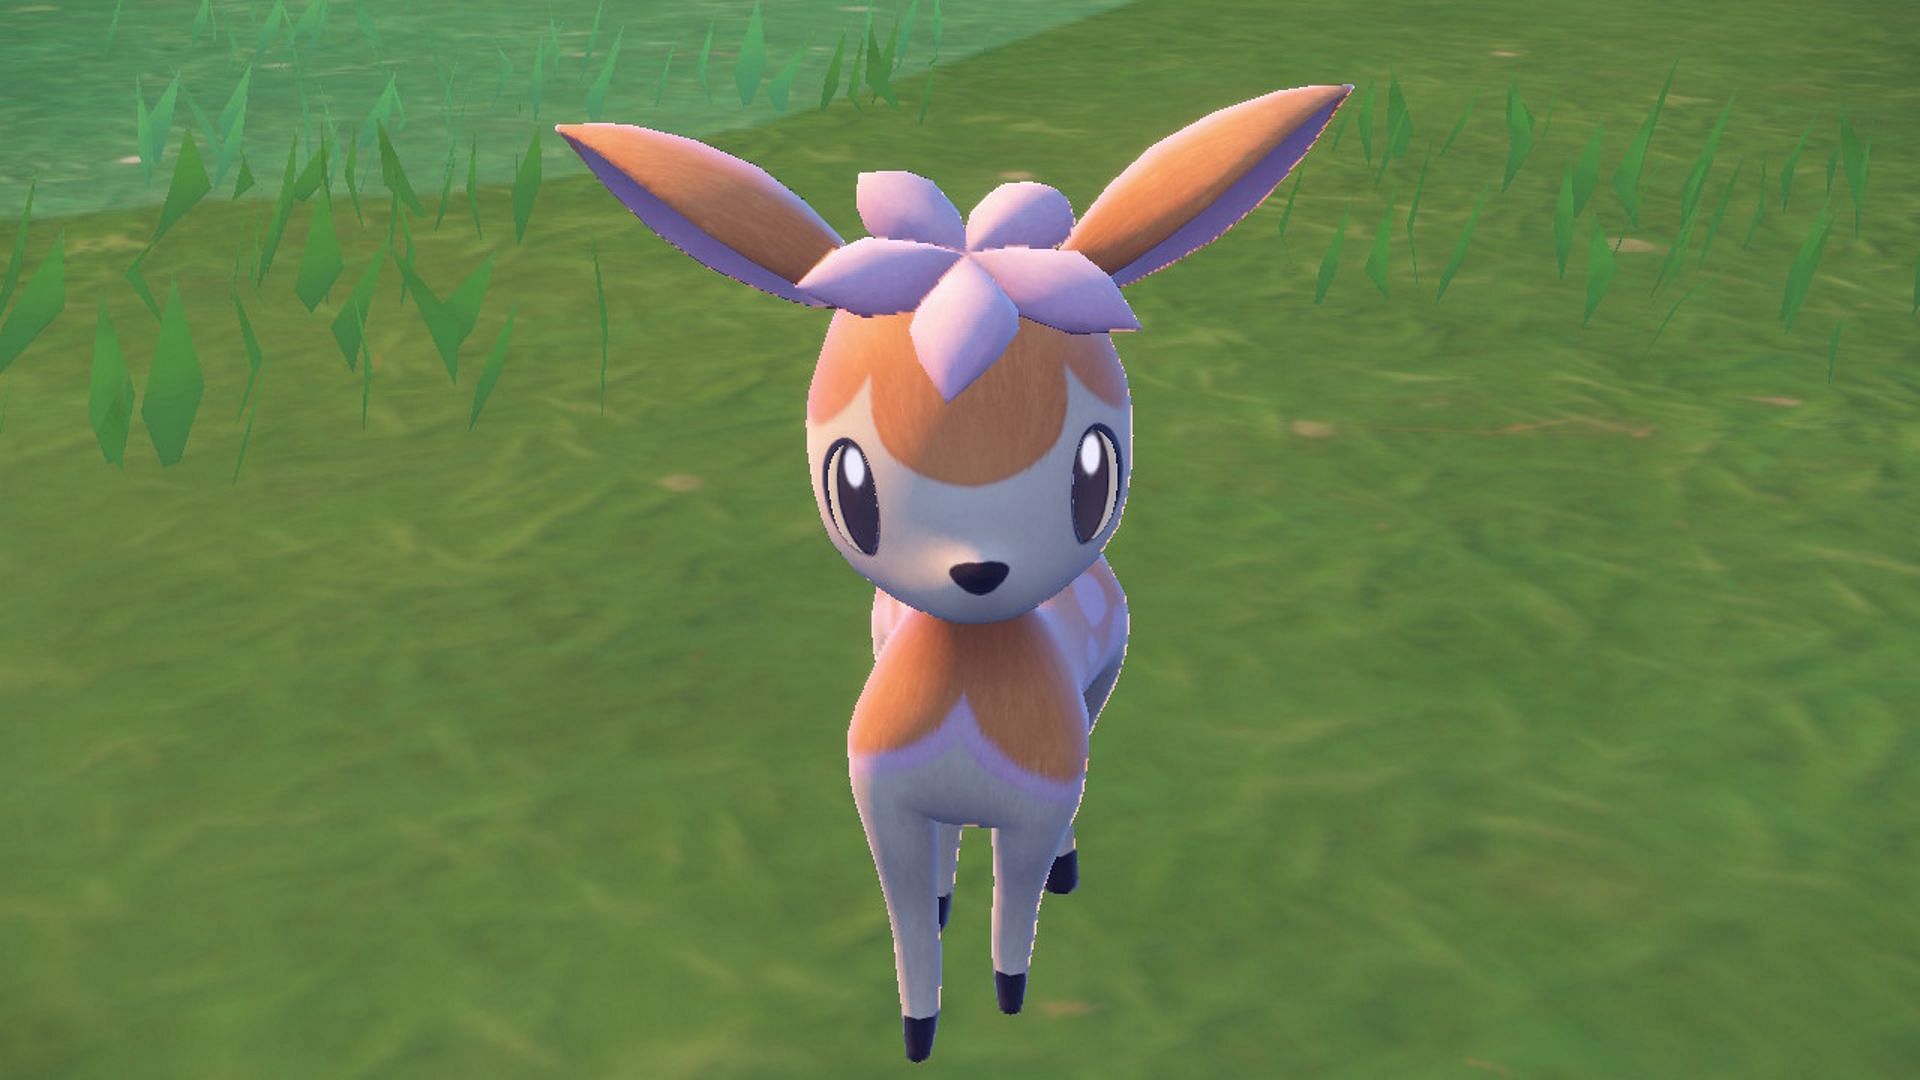 The EASIEST way to get a shiny eevee in scarlet and violet